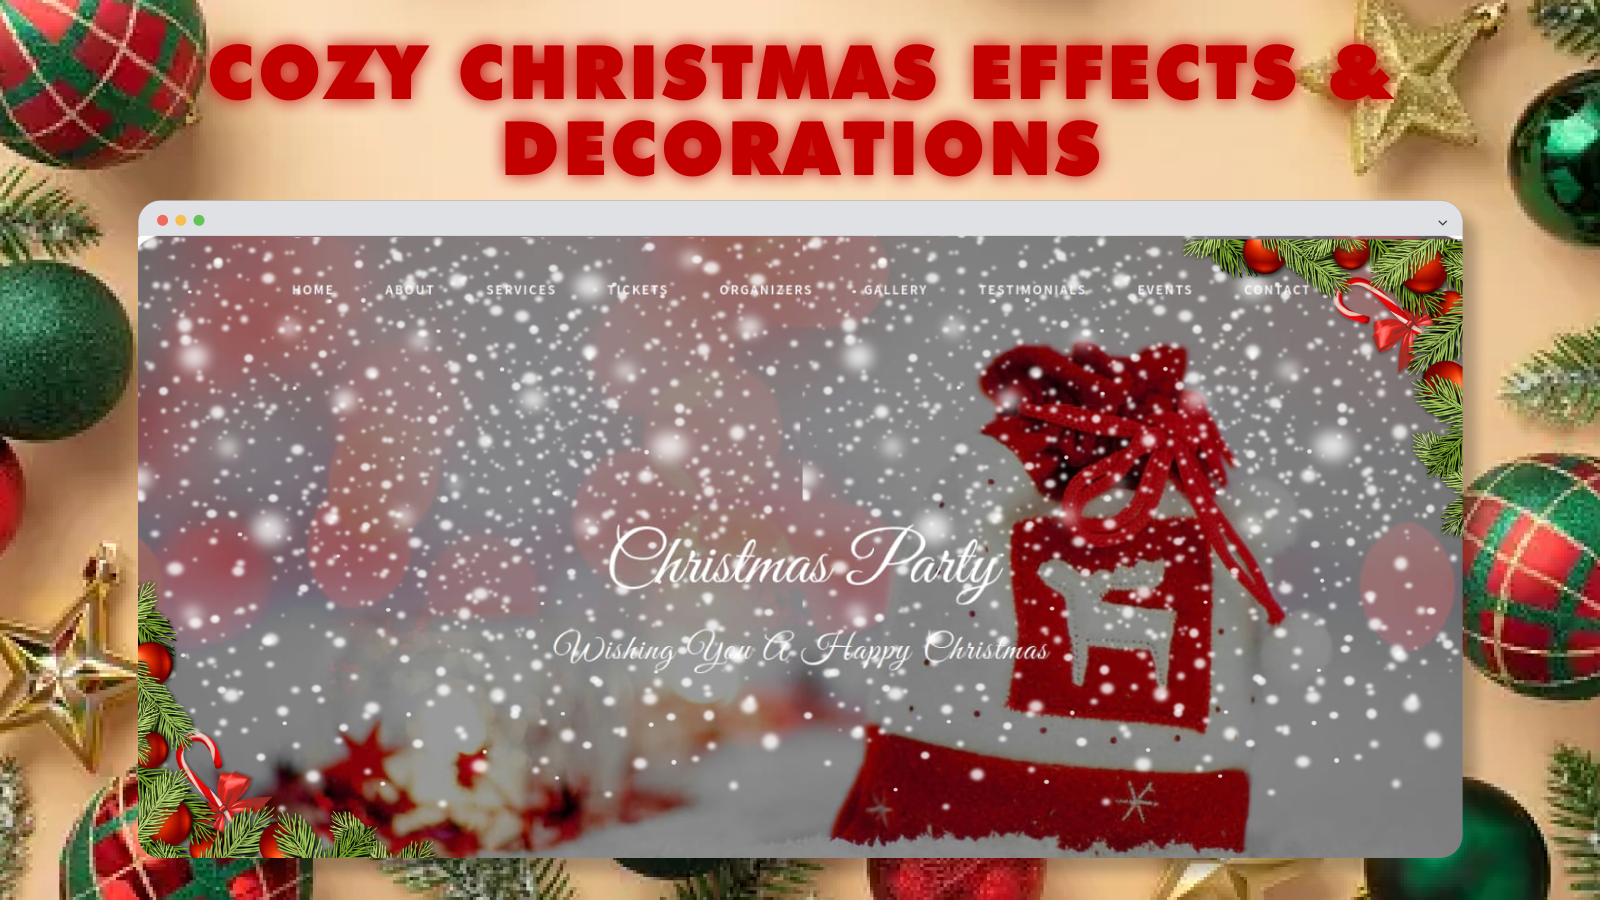 The falling snow effect and decorations in action